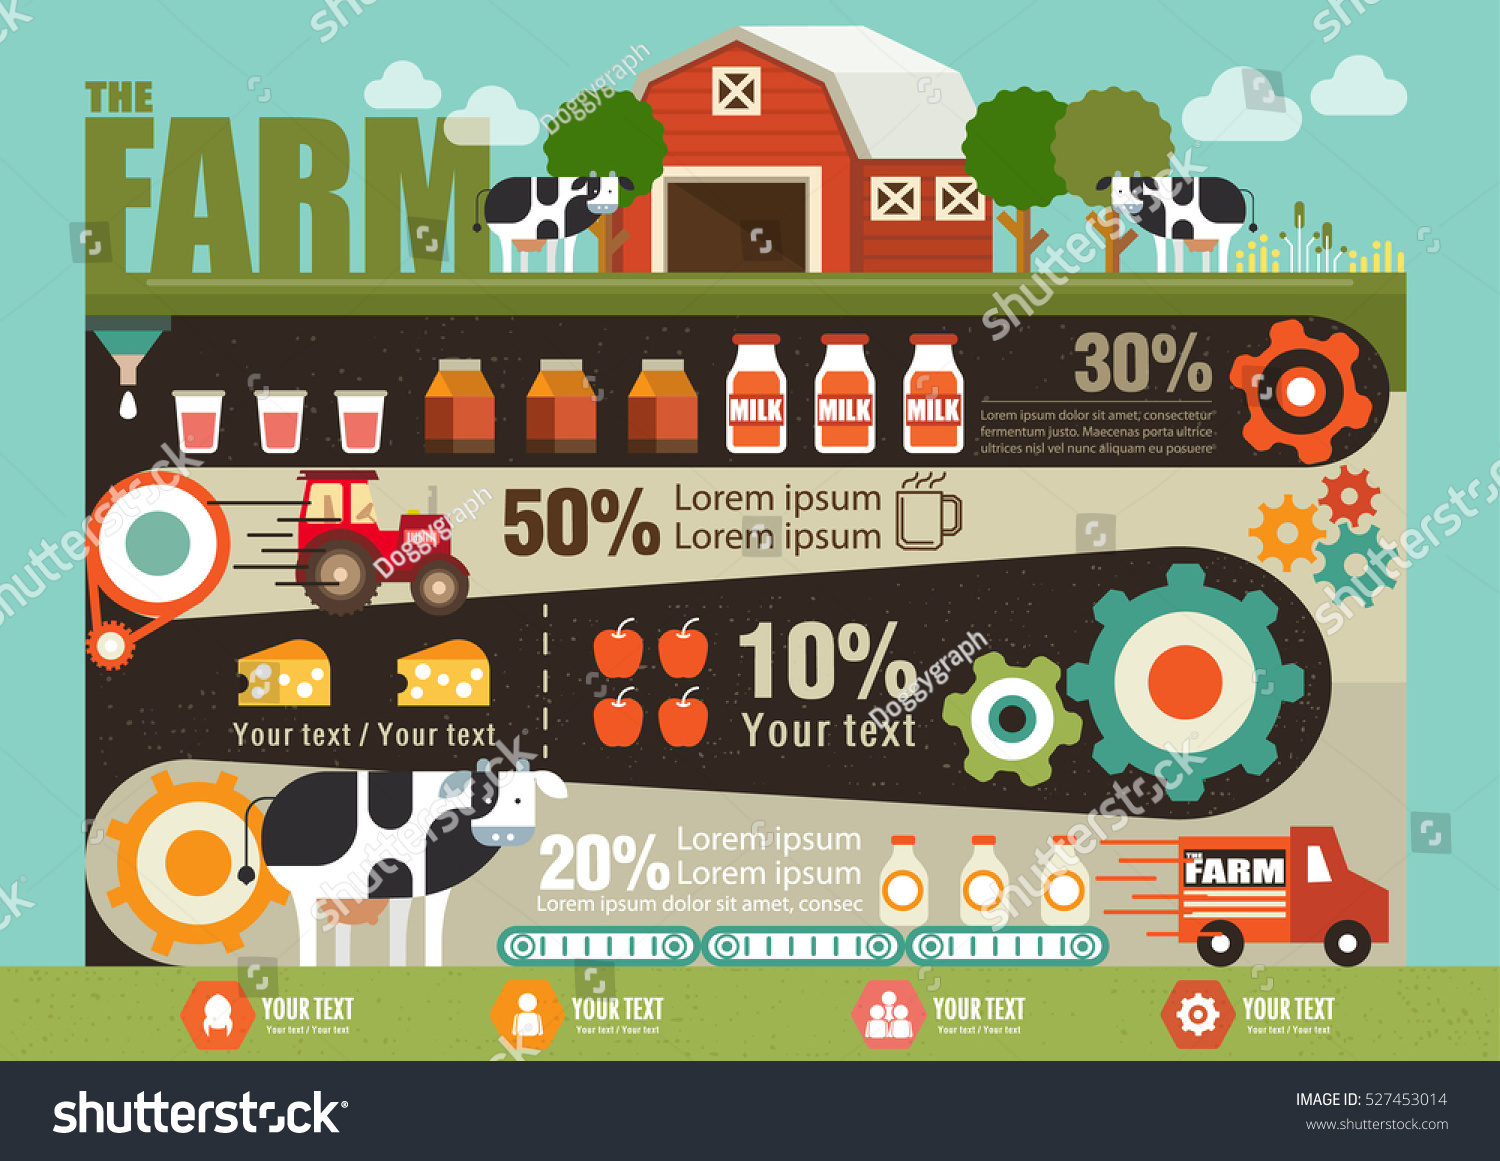 Milk Farm Delivery Dairy Product Infographics Stock Vector 527453014 ...